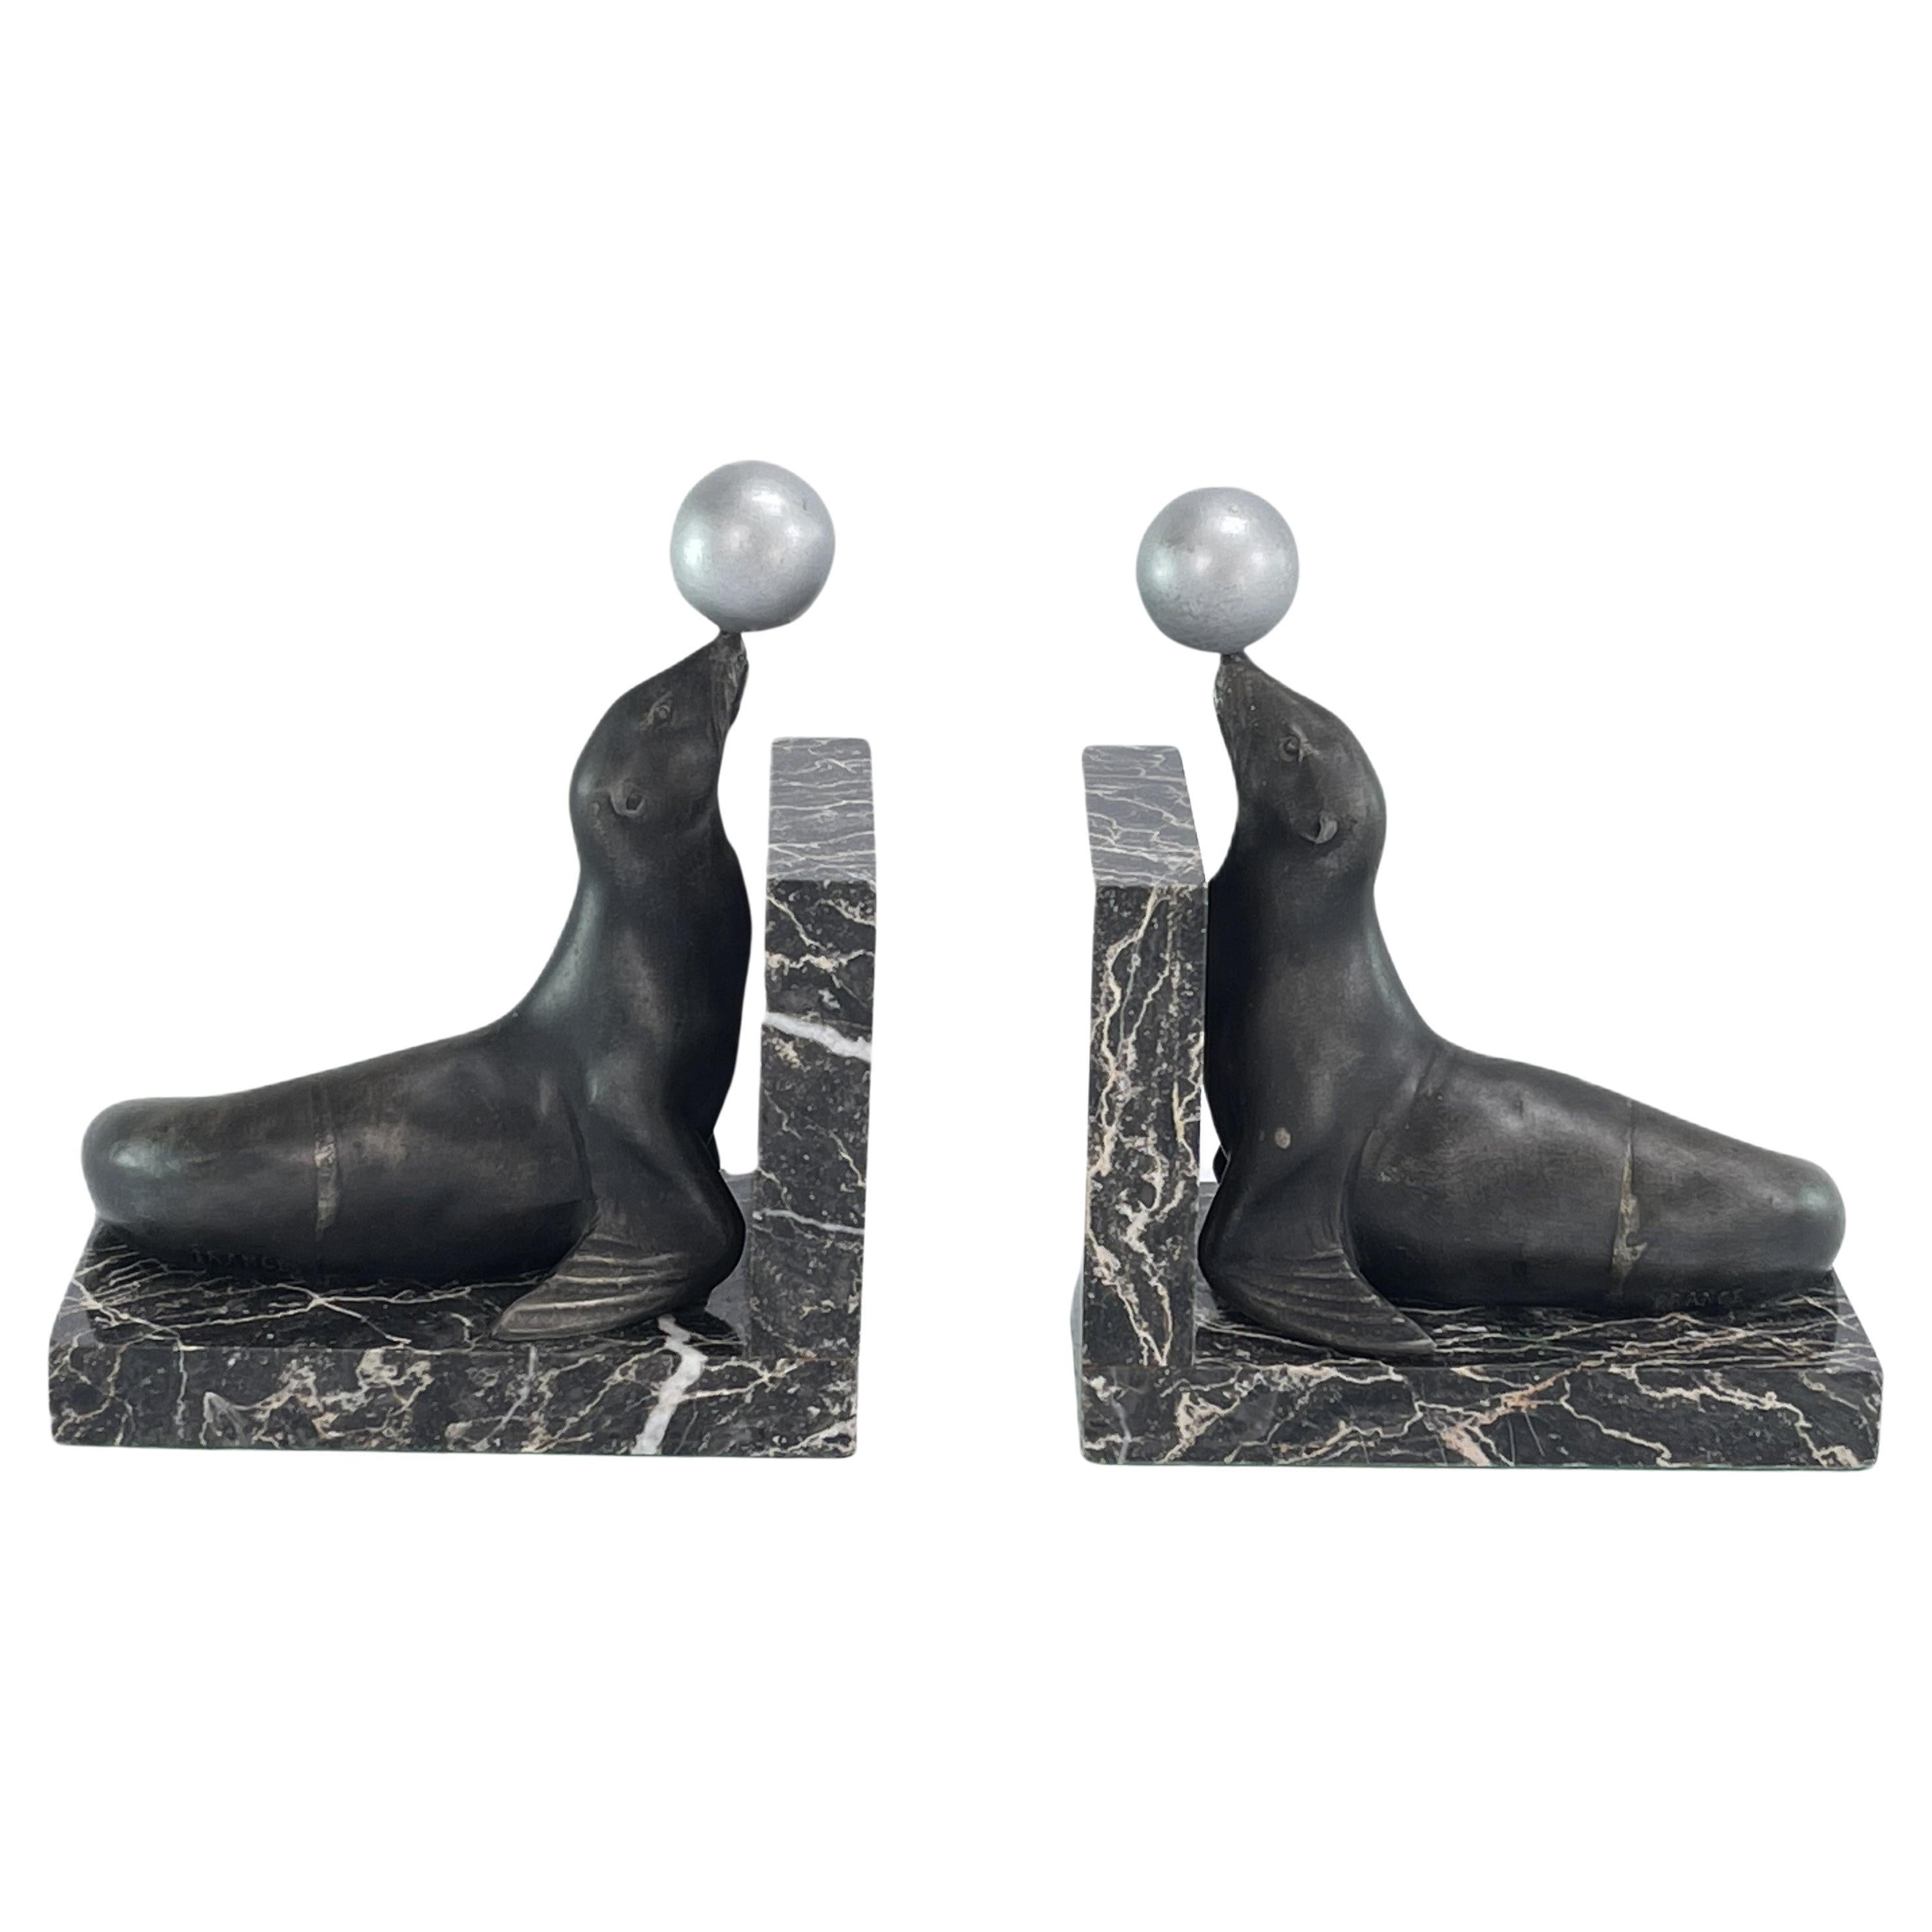 2 original ART DECO bookends with sea lions on a marble base, 1930s